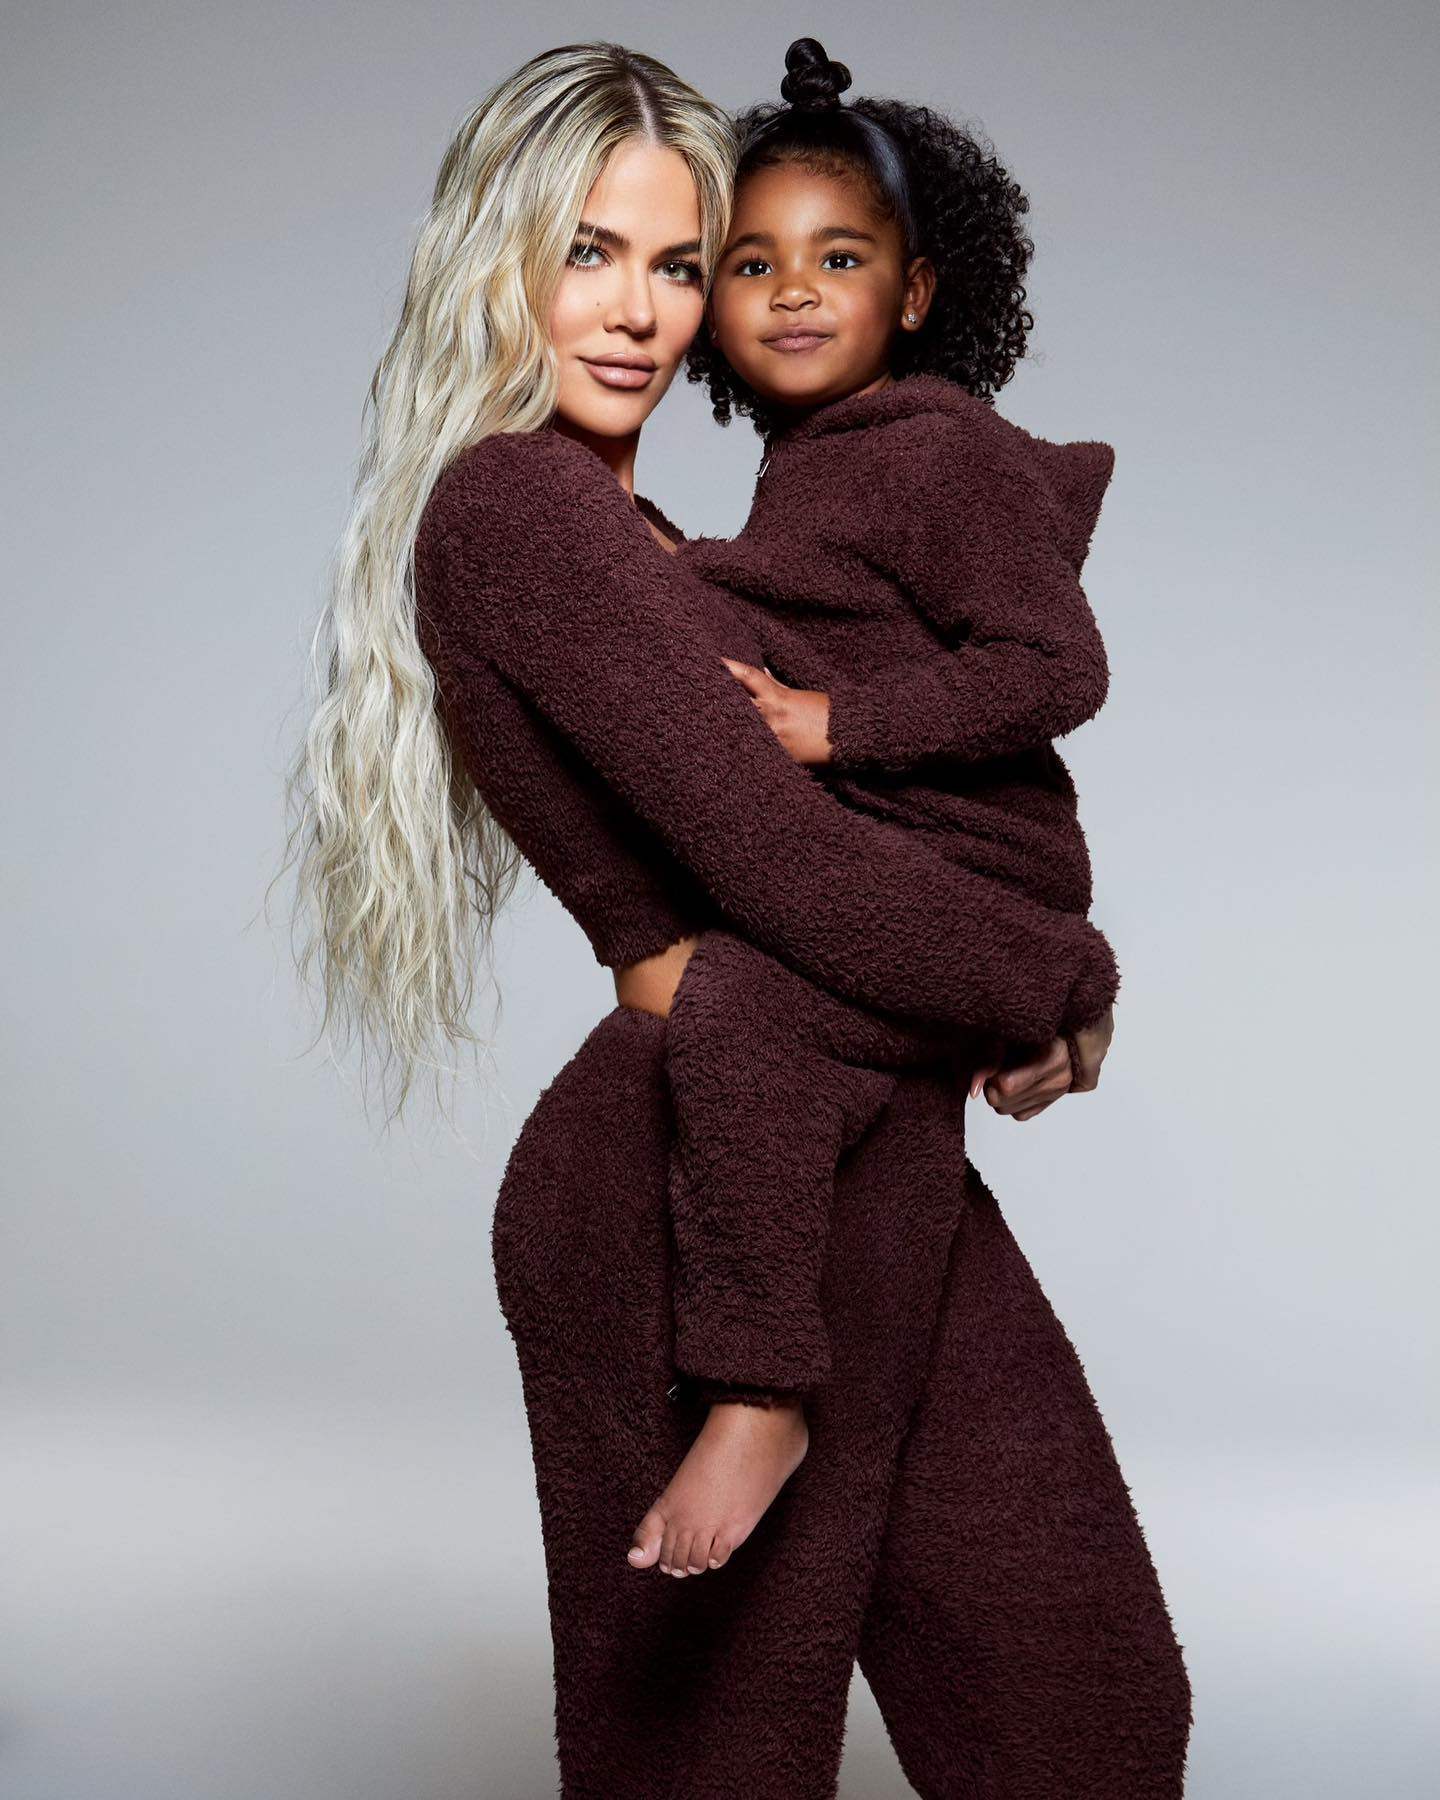 Inside the luxury life of Khloe Kardashian's daughter True: from Louis  Vuitton purses and matching Dior outfits with her mum, to OTT Disney  princess birthdays, this three-year-old has it all